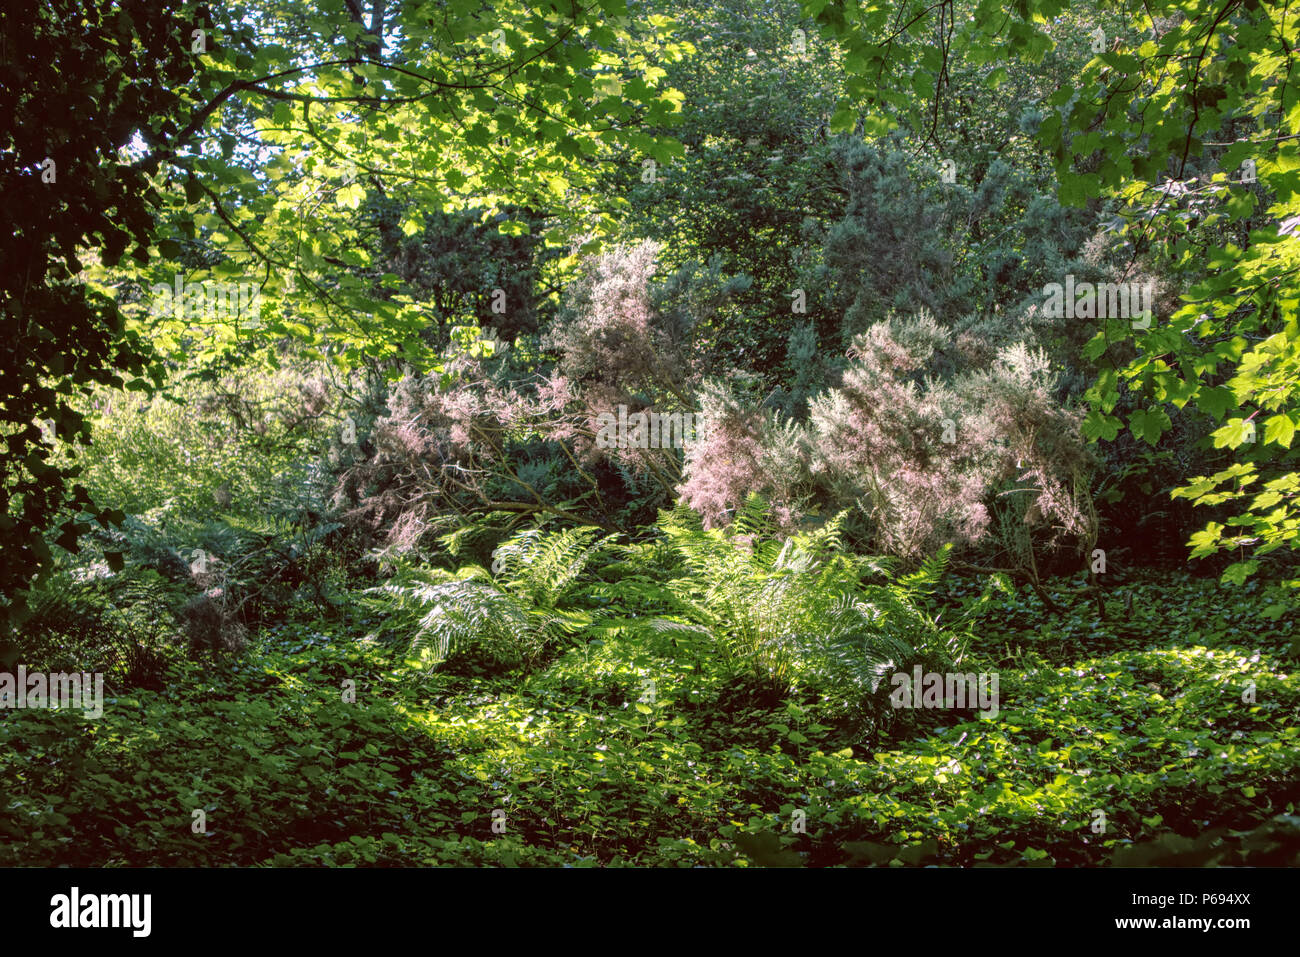 A photograph of the forest inside the natural reserve of Corstorphine hil with lovely shots of sunrays in Edinburgh, Scotland, United Kingdom Stock Photo